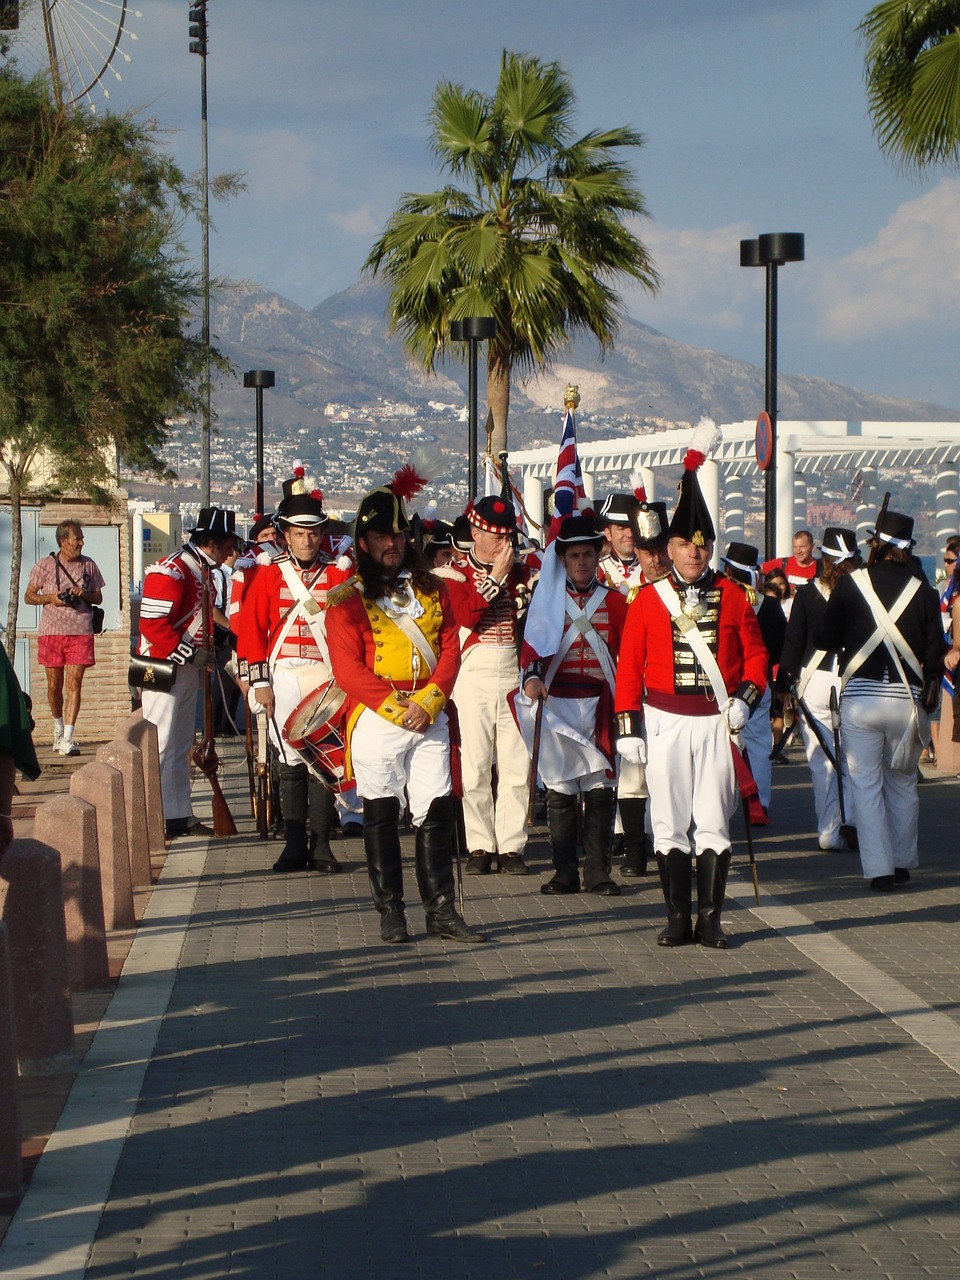 soldiers marching malaga spain soldiers costume free photo